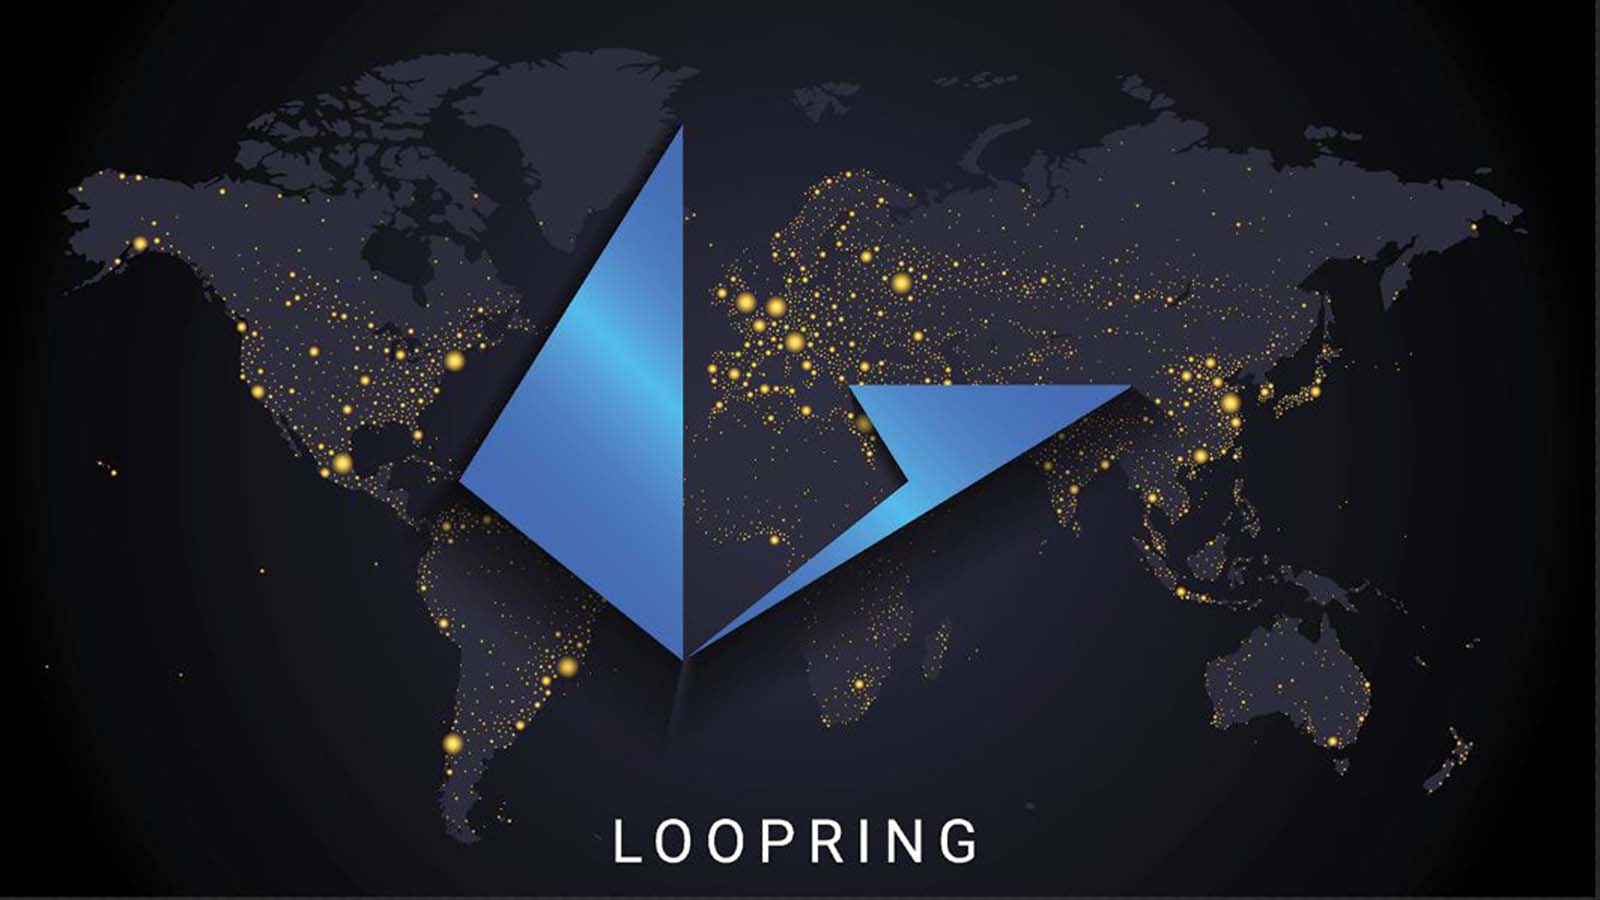 A concept image showing the Loopring (LRC) logo on top of a grey and black world map. Loopring Price Predictions